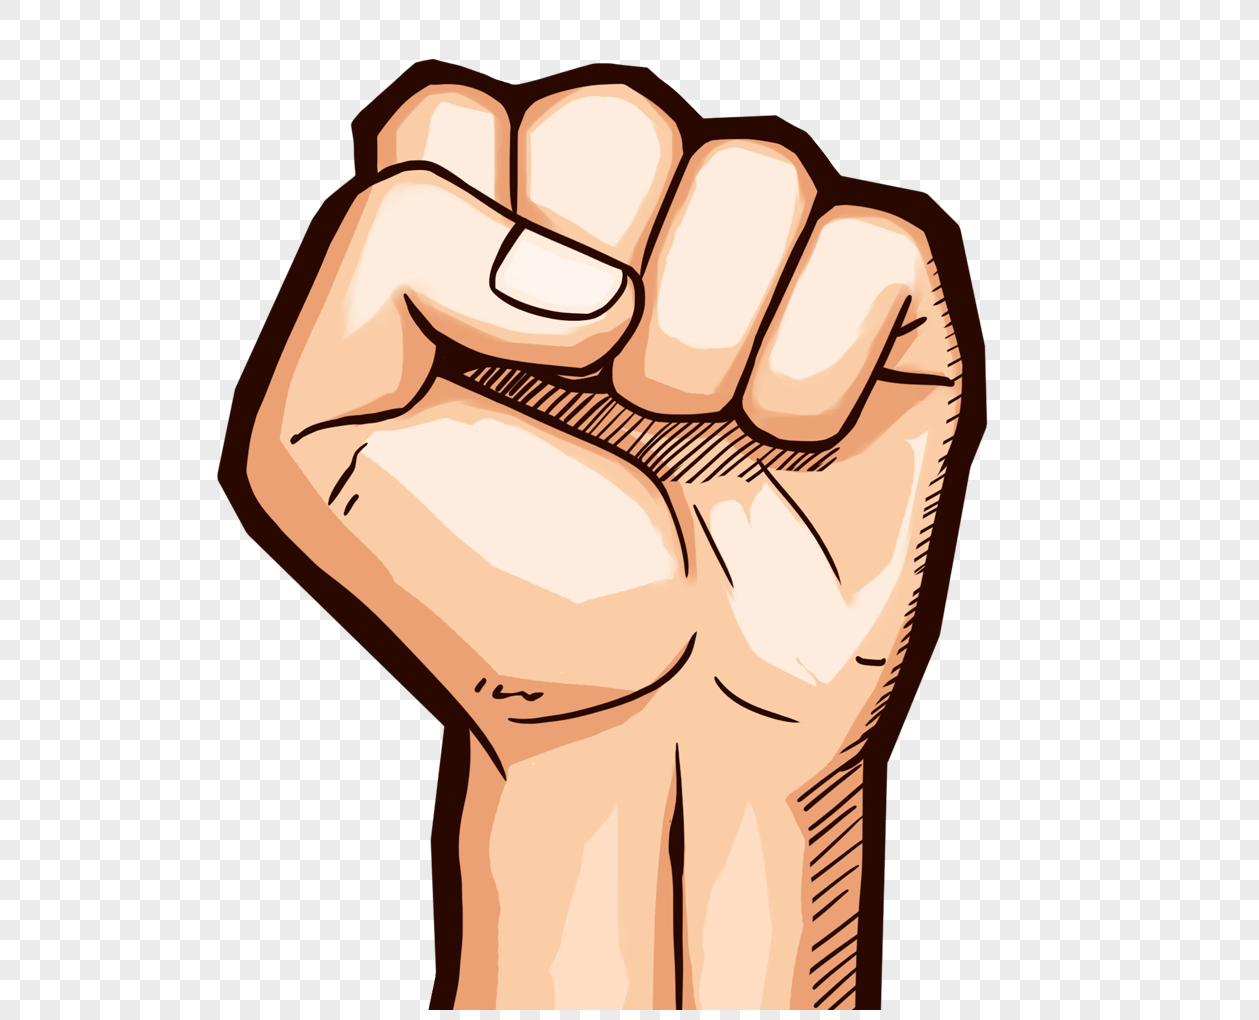 Cartoon fist png image_picture free download